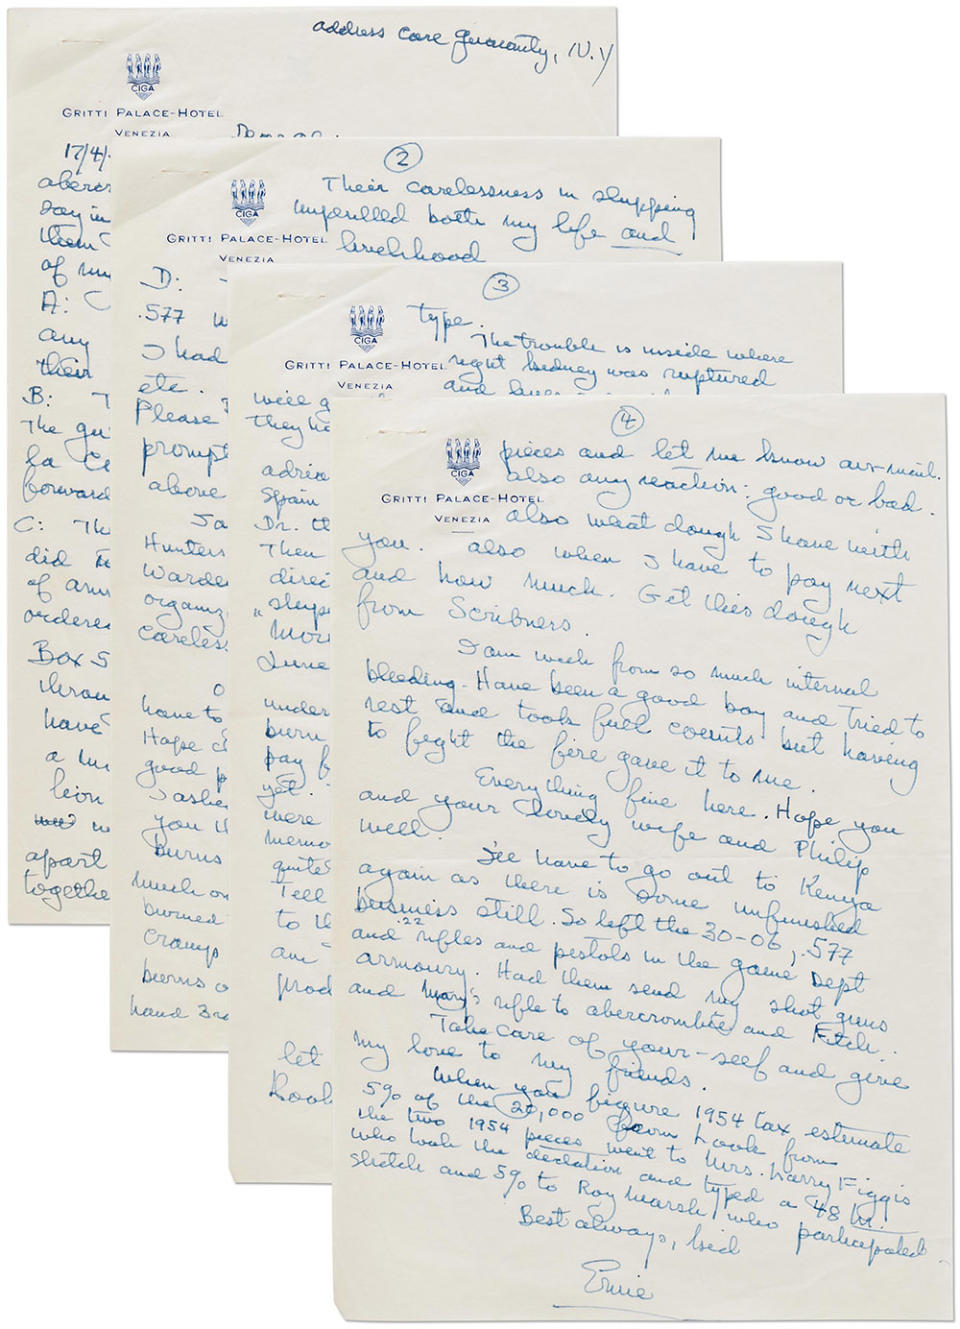 The letter that Hemingway wrote